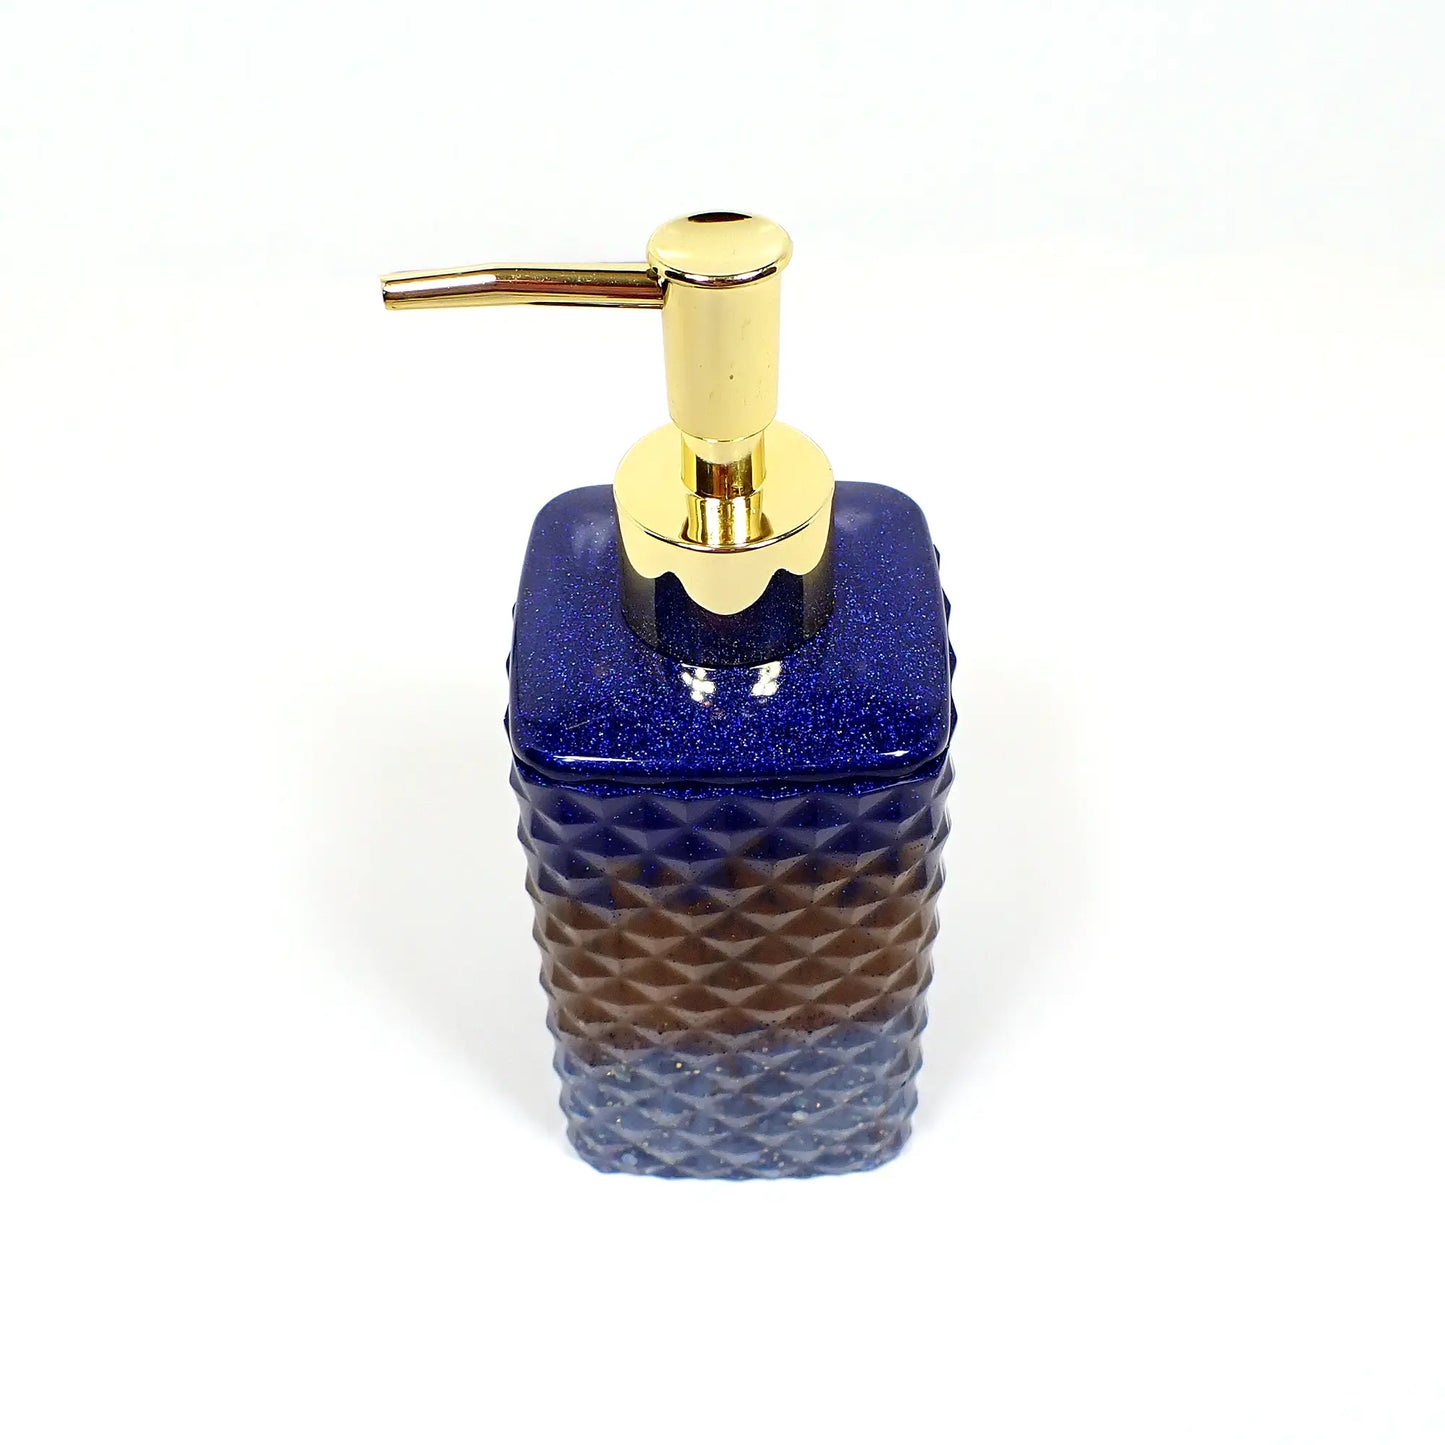 Faceted Square Handmade Pearly Blue and Brown Resin and Glitter Soap Dispenser, Lotion Dispenser